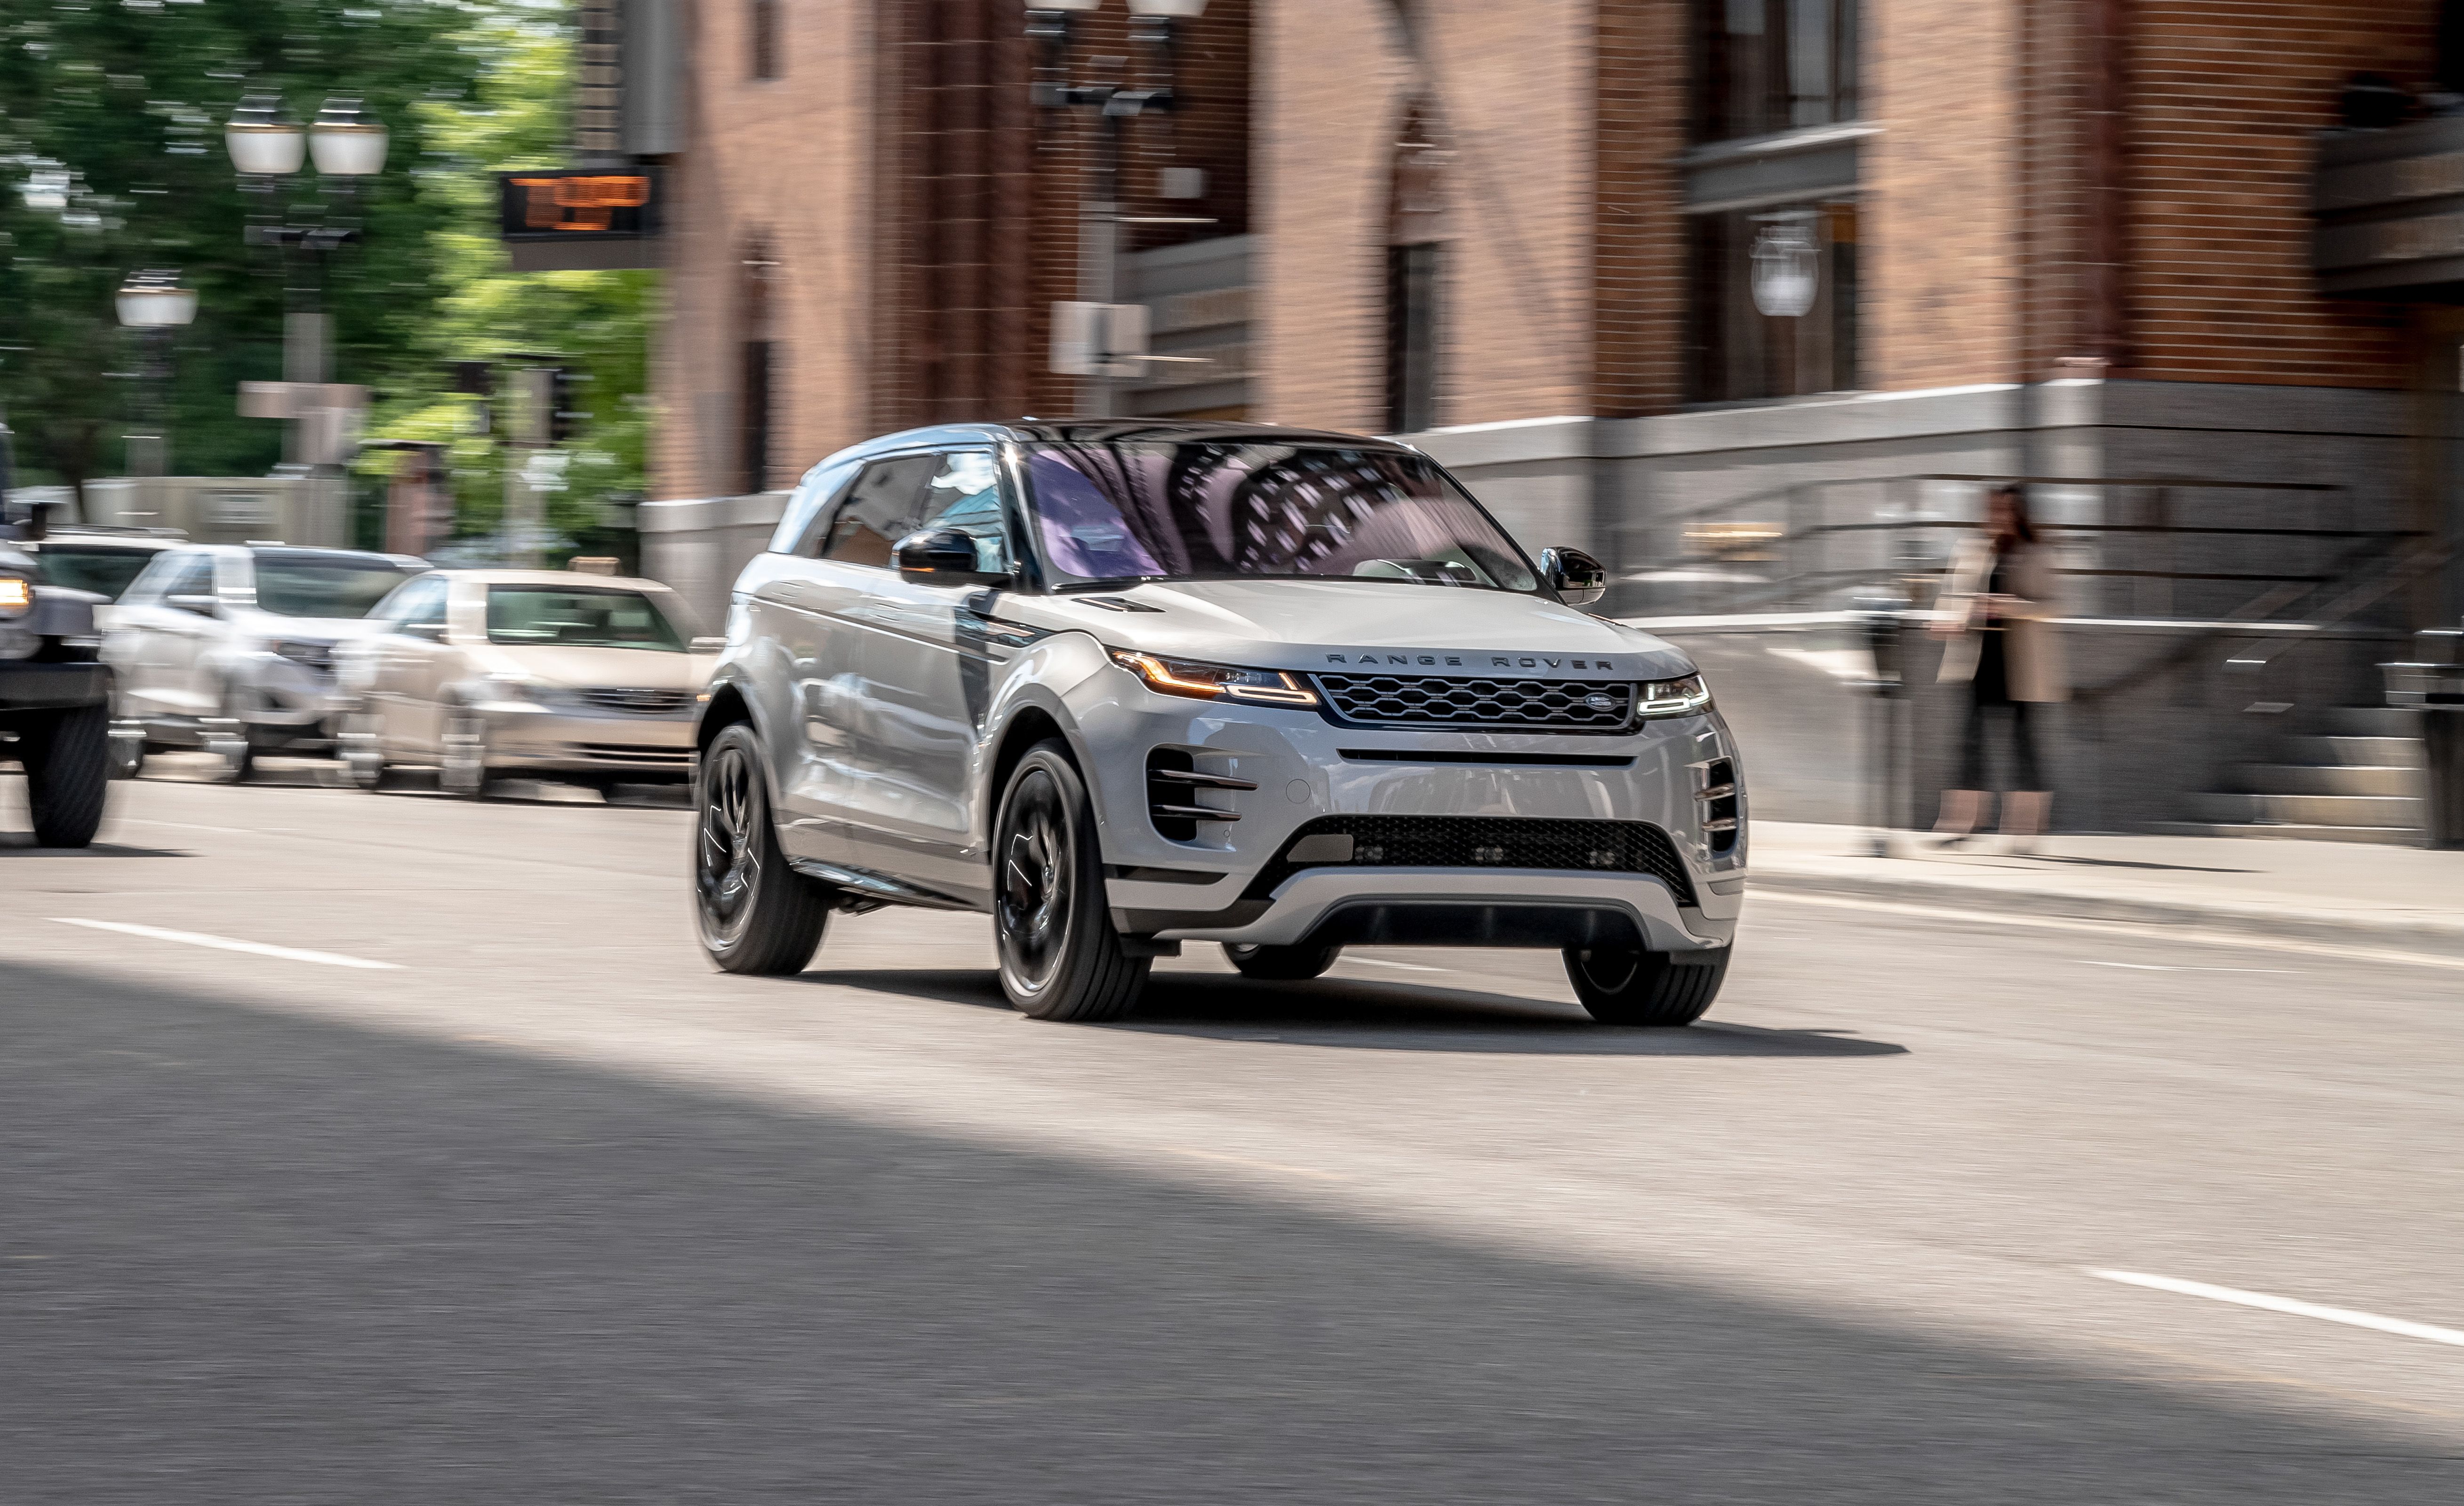 2020 Land Rover Range Rover Evoque Review, Pricing, and Specs